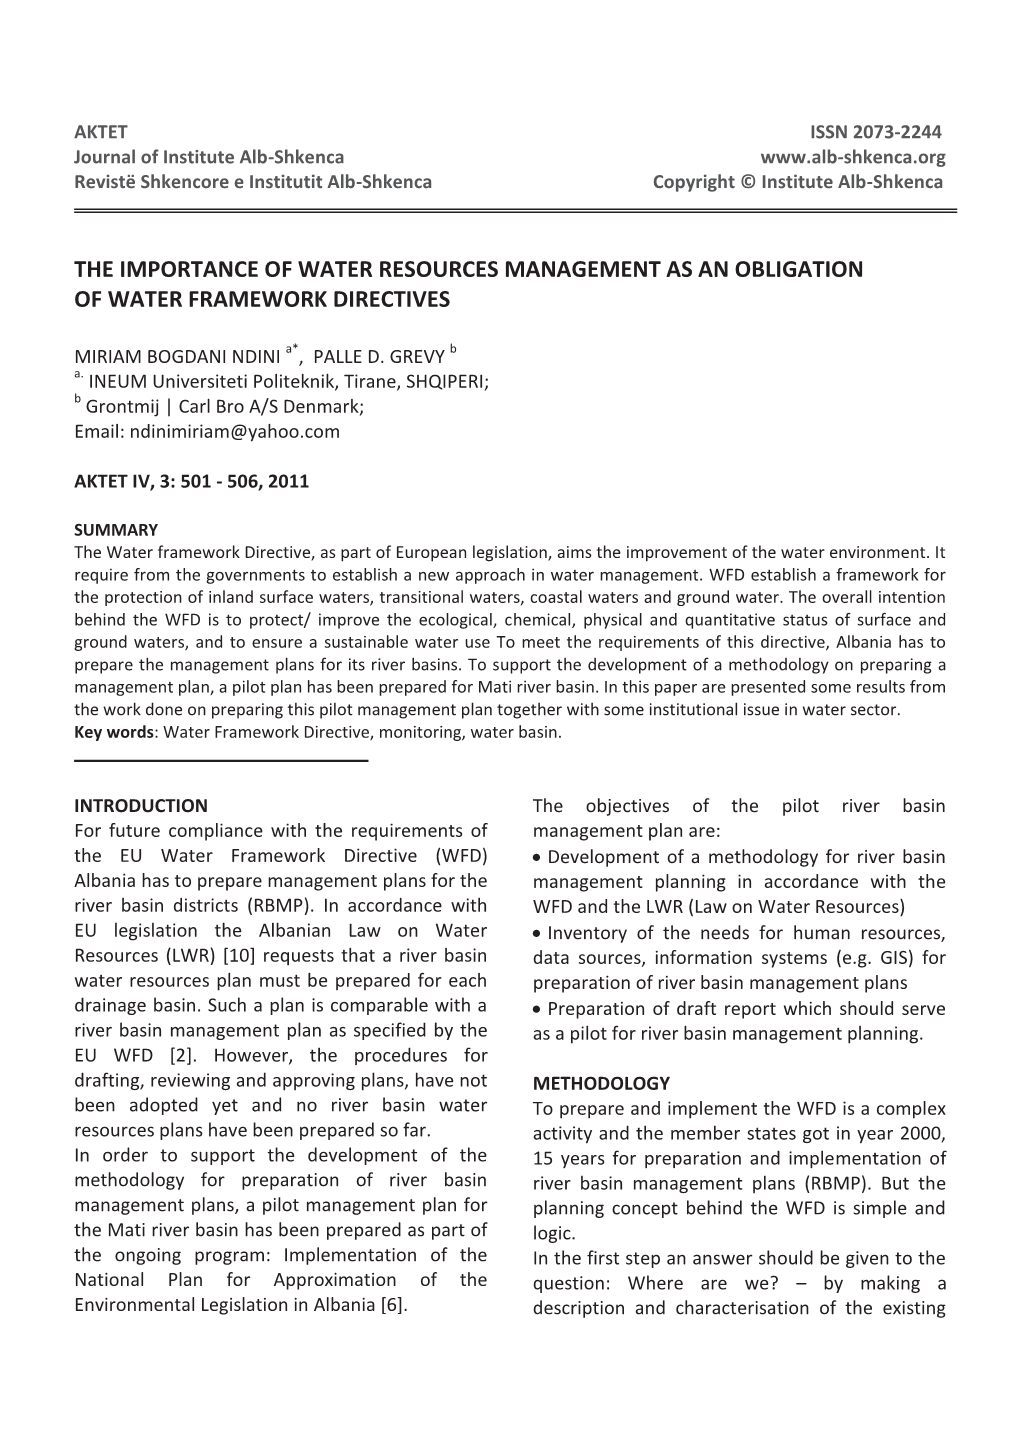 The Importance of Water Resources Management As an Obligation of Water Framework Directives